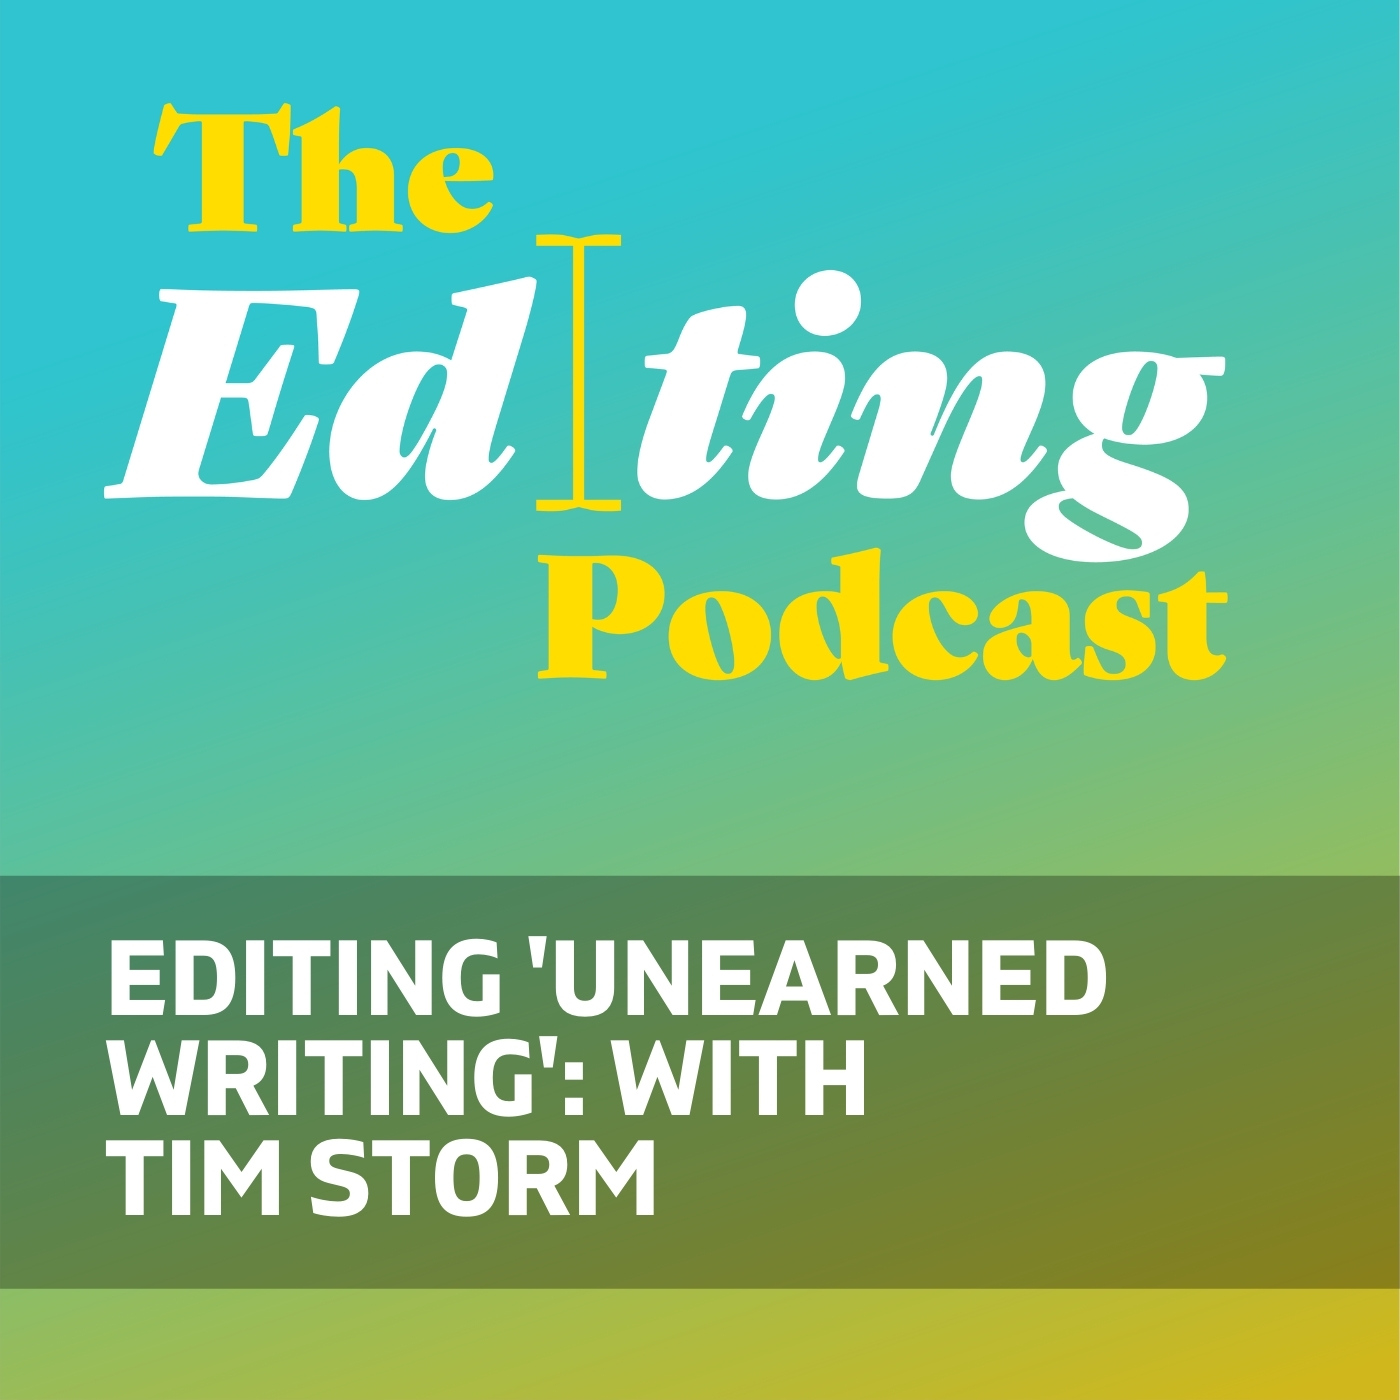 Editing ’unearned writing’